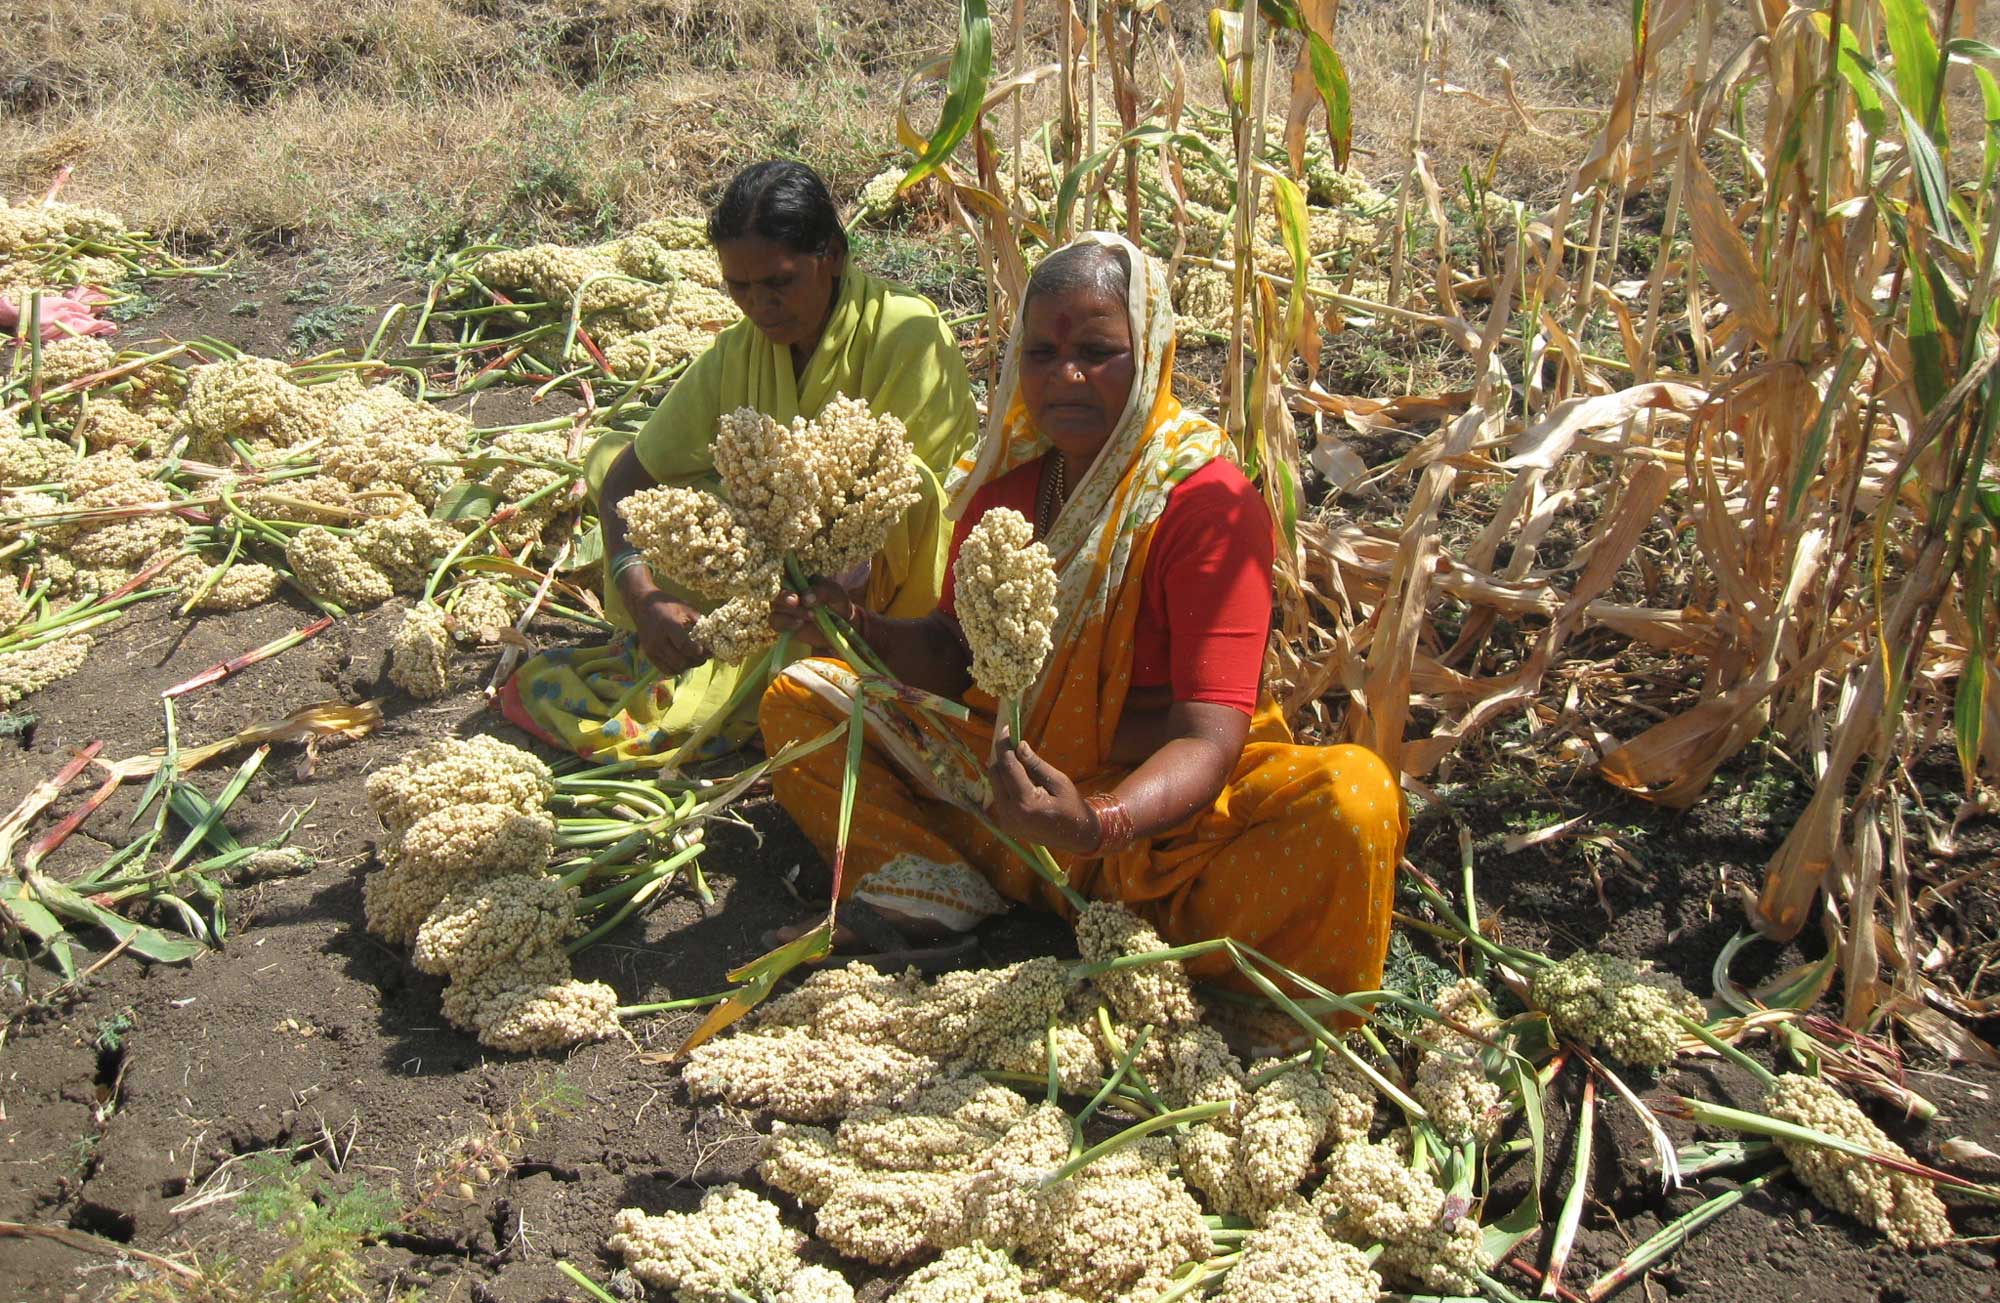 Photograph of two women sitting near sorghum plants and inspecting harvested ears of sorghum. The photo shows two women in traditional Indian dress sitting near one another among ears of sorghum with white kernels. The nearer woman is holding up ears in both hands and appears to be looking at them. A bundle of ears is sitting on the ground in front of the women.